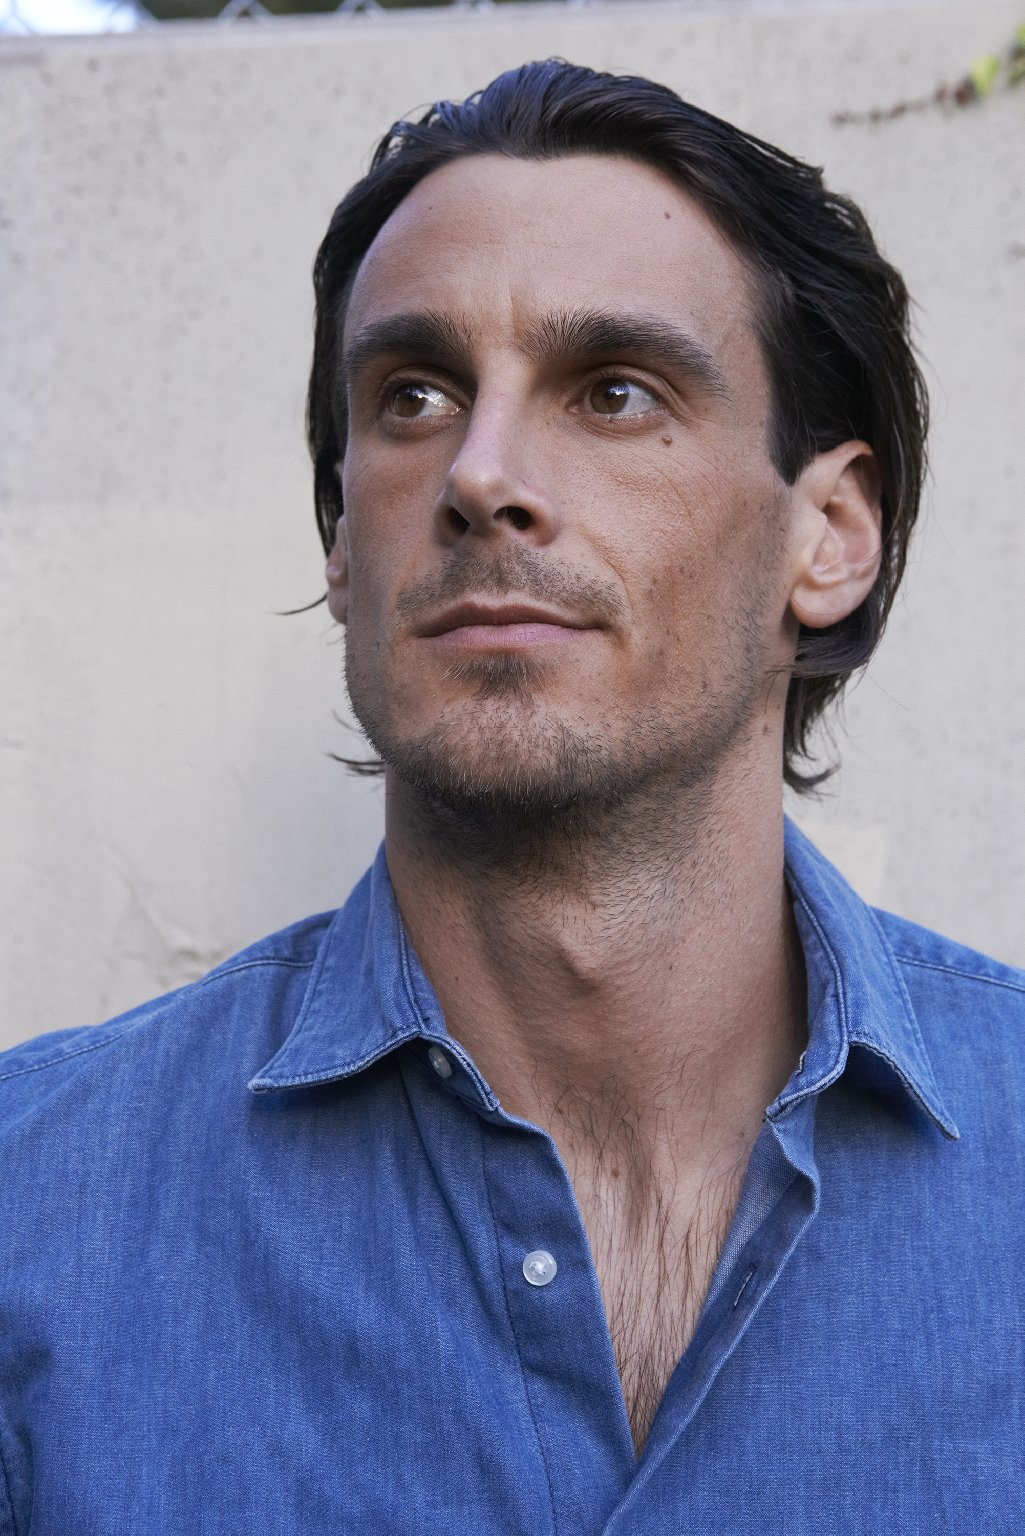 Author and NFL punter Chris Kluwe (photo by David Bowman)